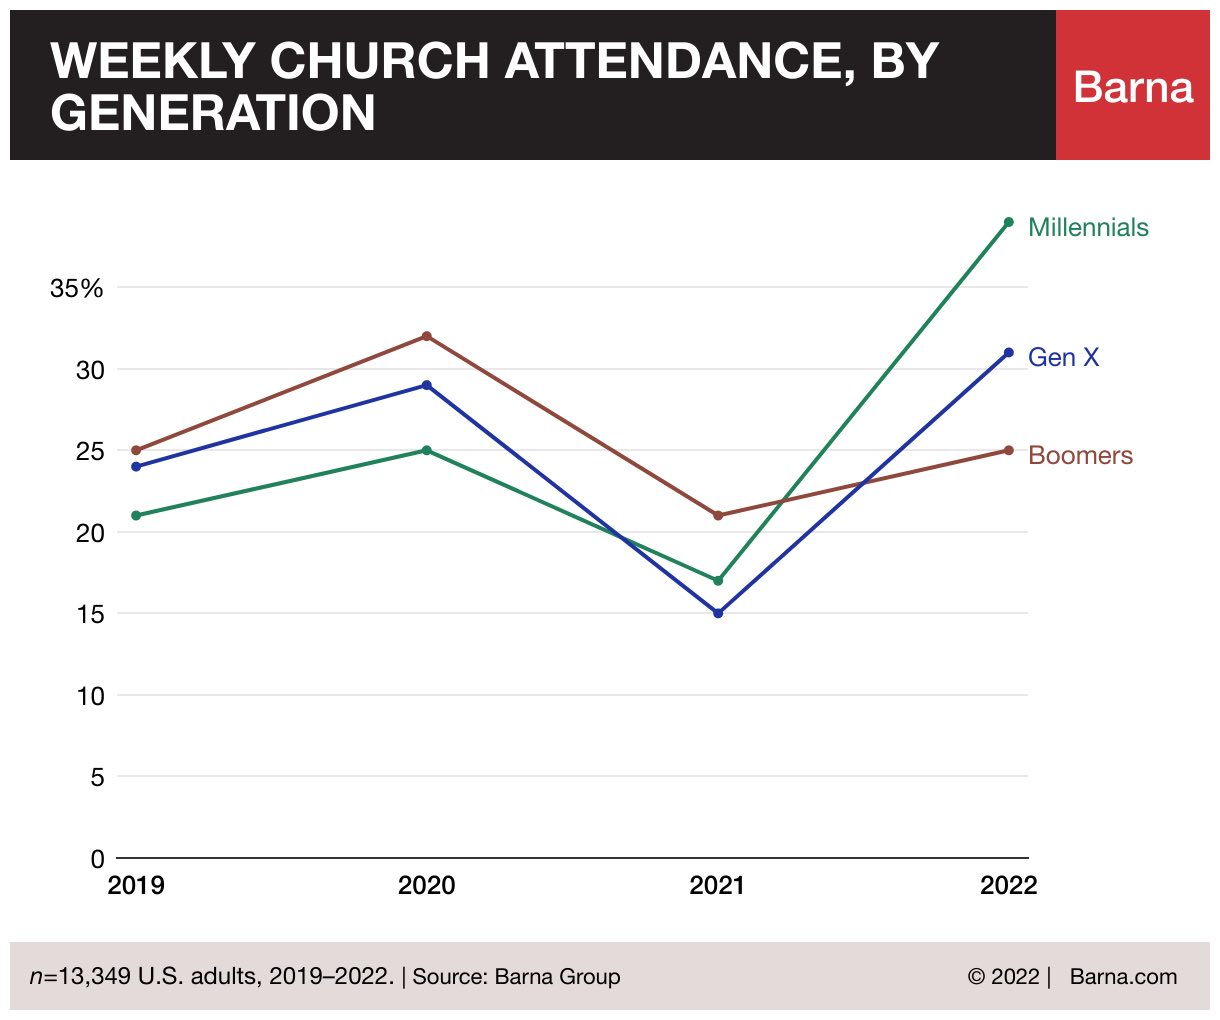 Weekly Church Attendance by Generation 2022